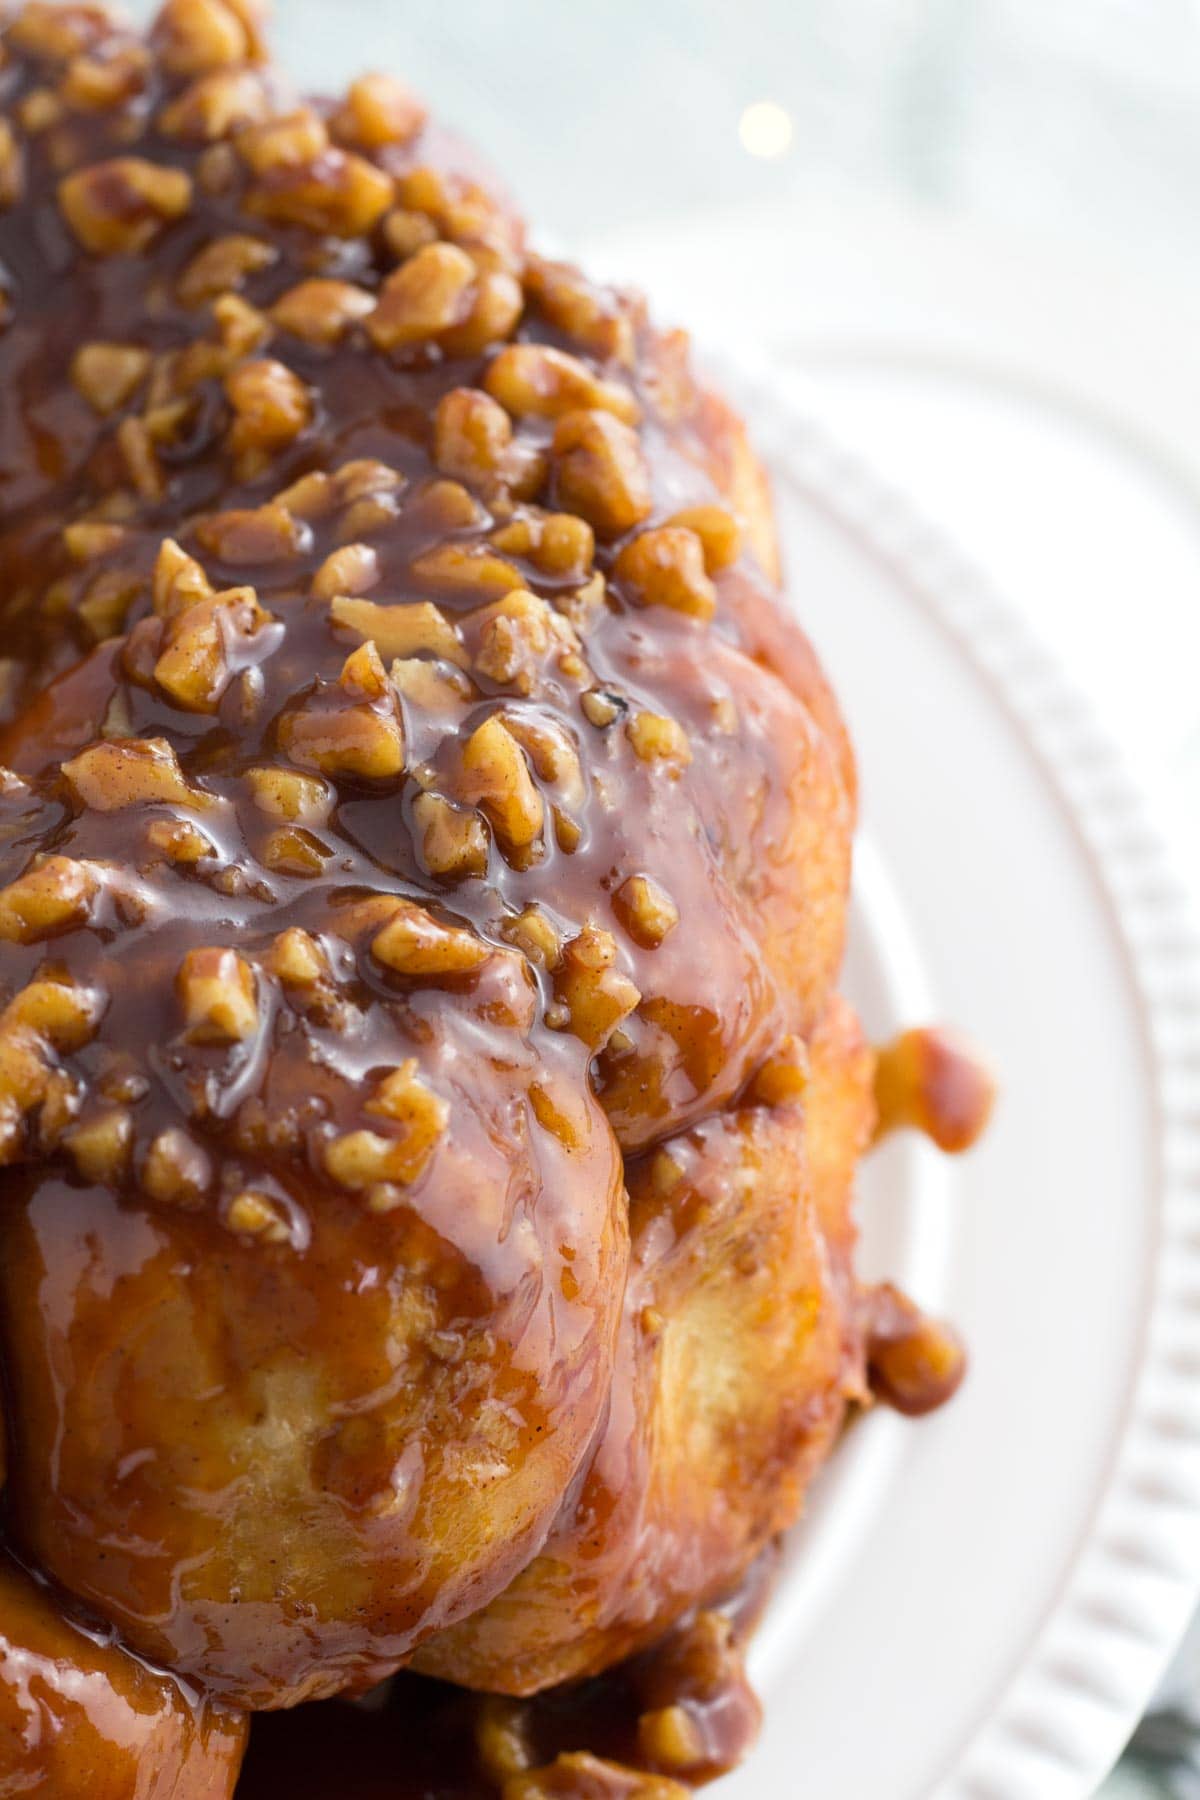 Monkey bread on cake stand with puddle of caramel sauce.